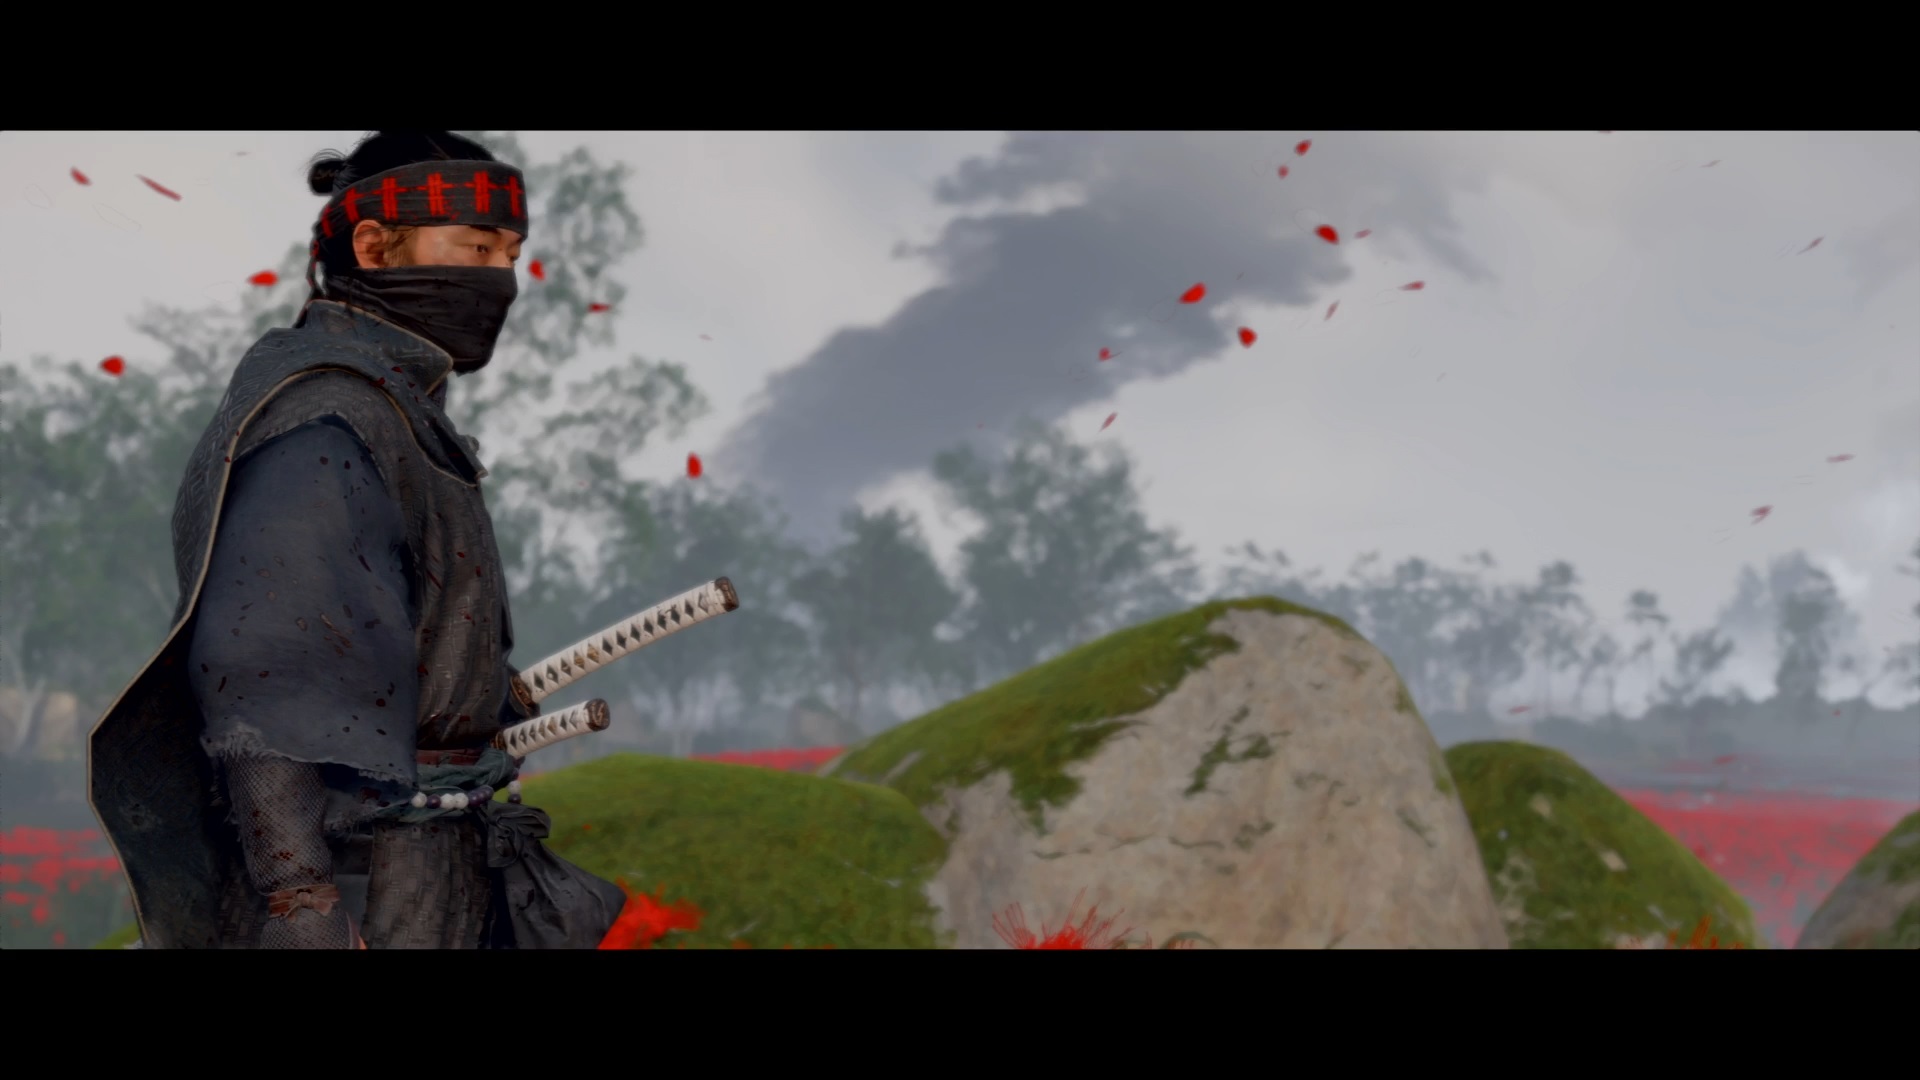 Ghost of Tsushima tips: 13 things all good Samurai need to learn